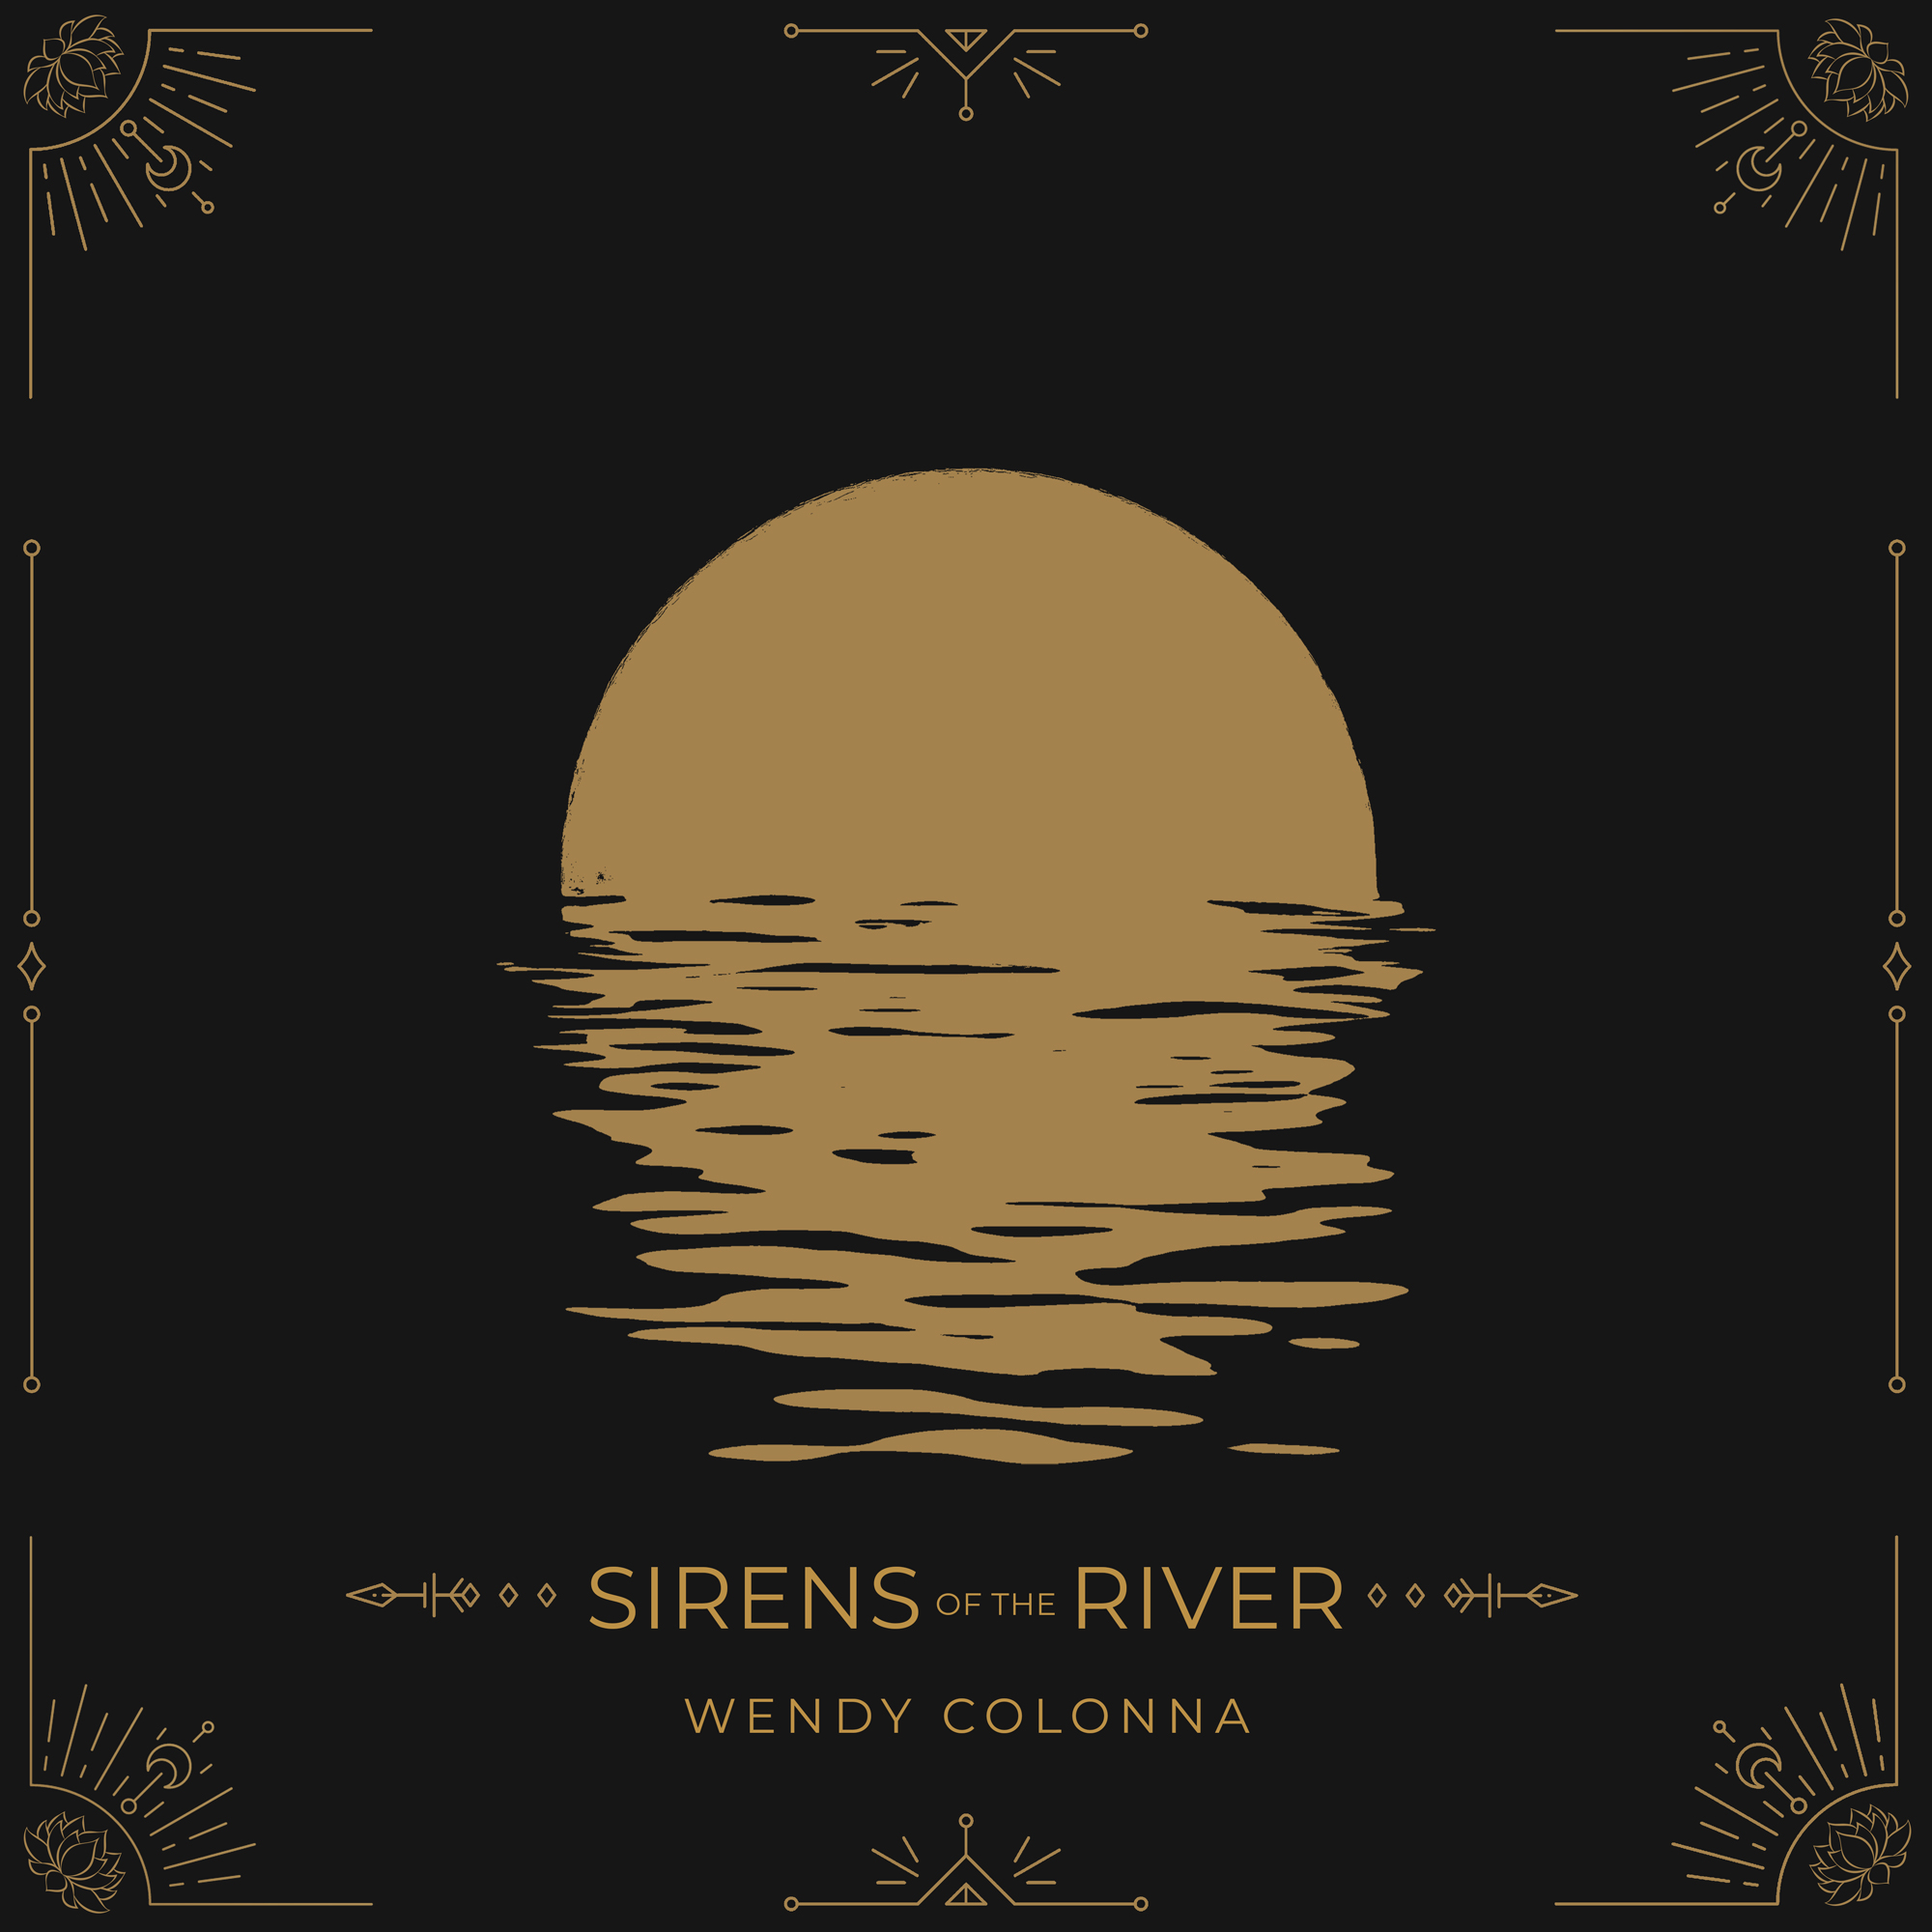 Sirens of the River